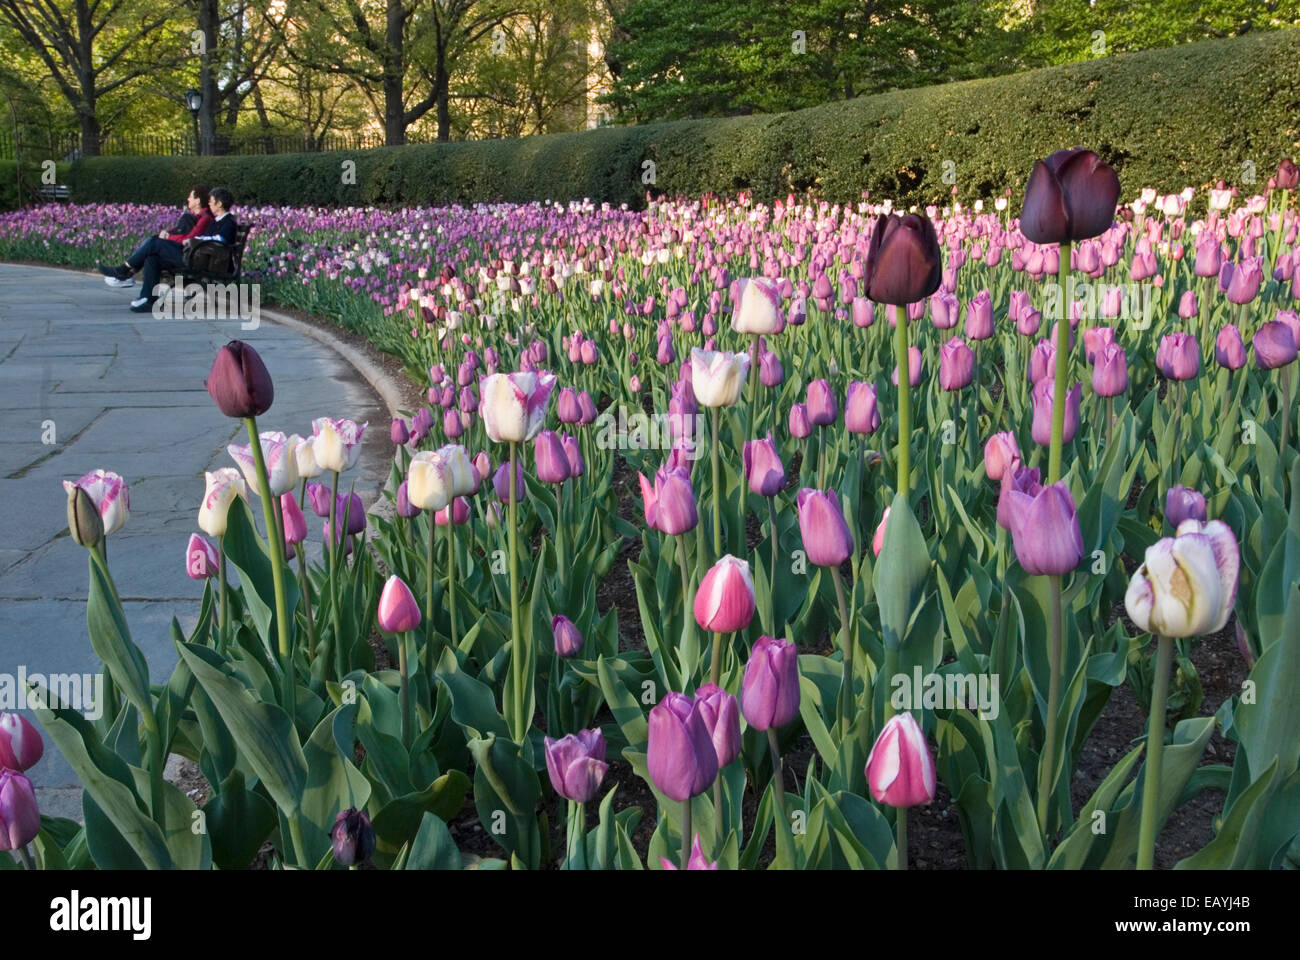 Tulips at the Conservatory Garden in Central Park, New York City Stock Photo